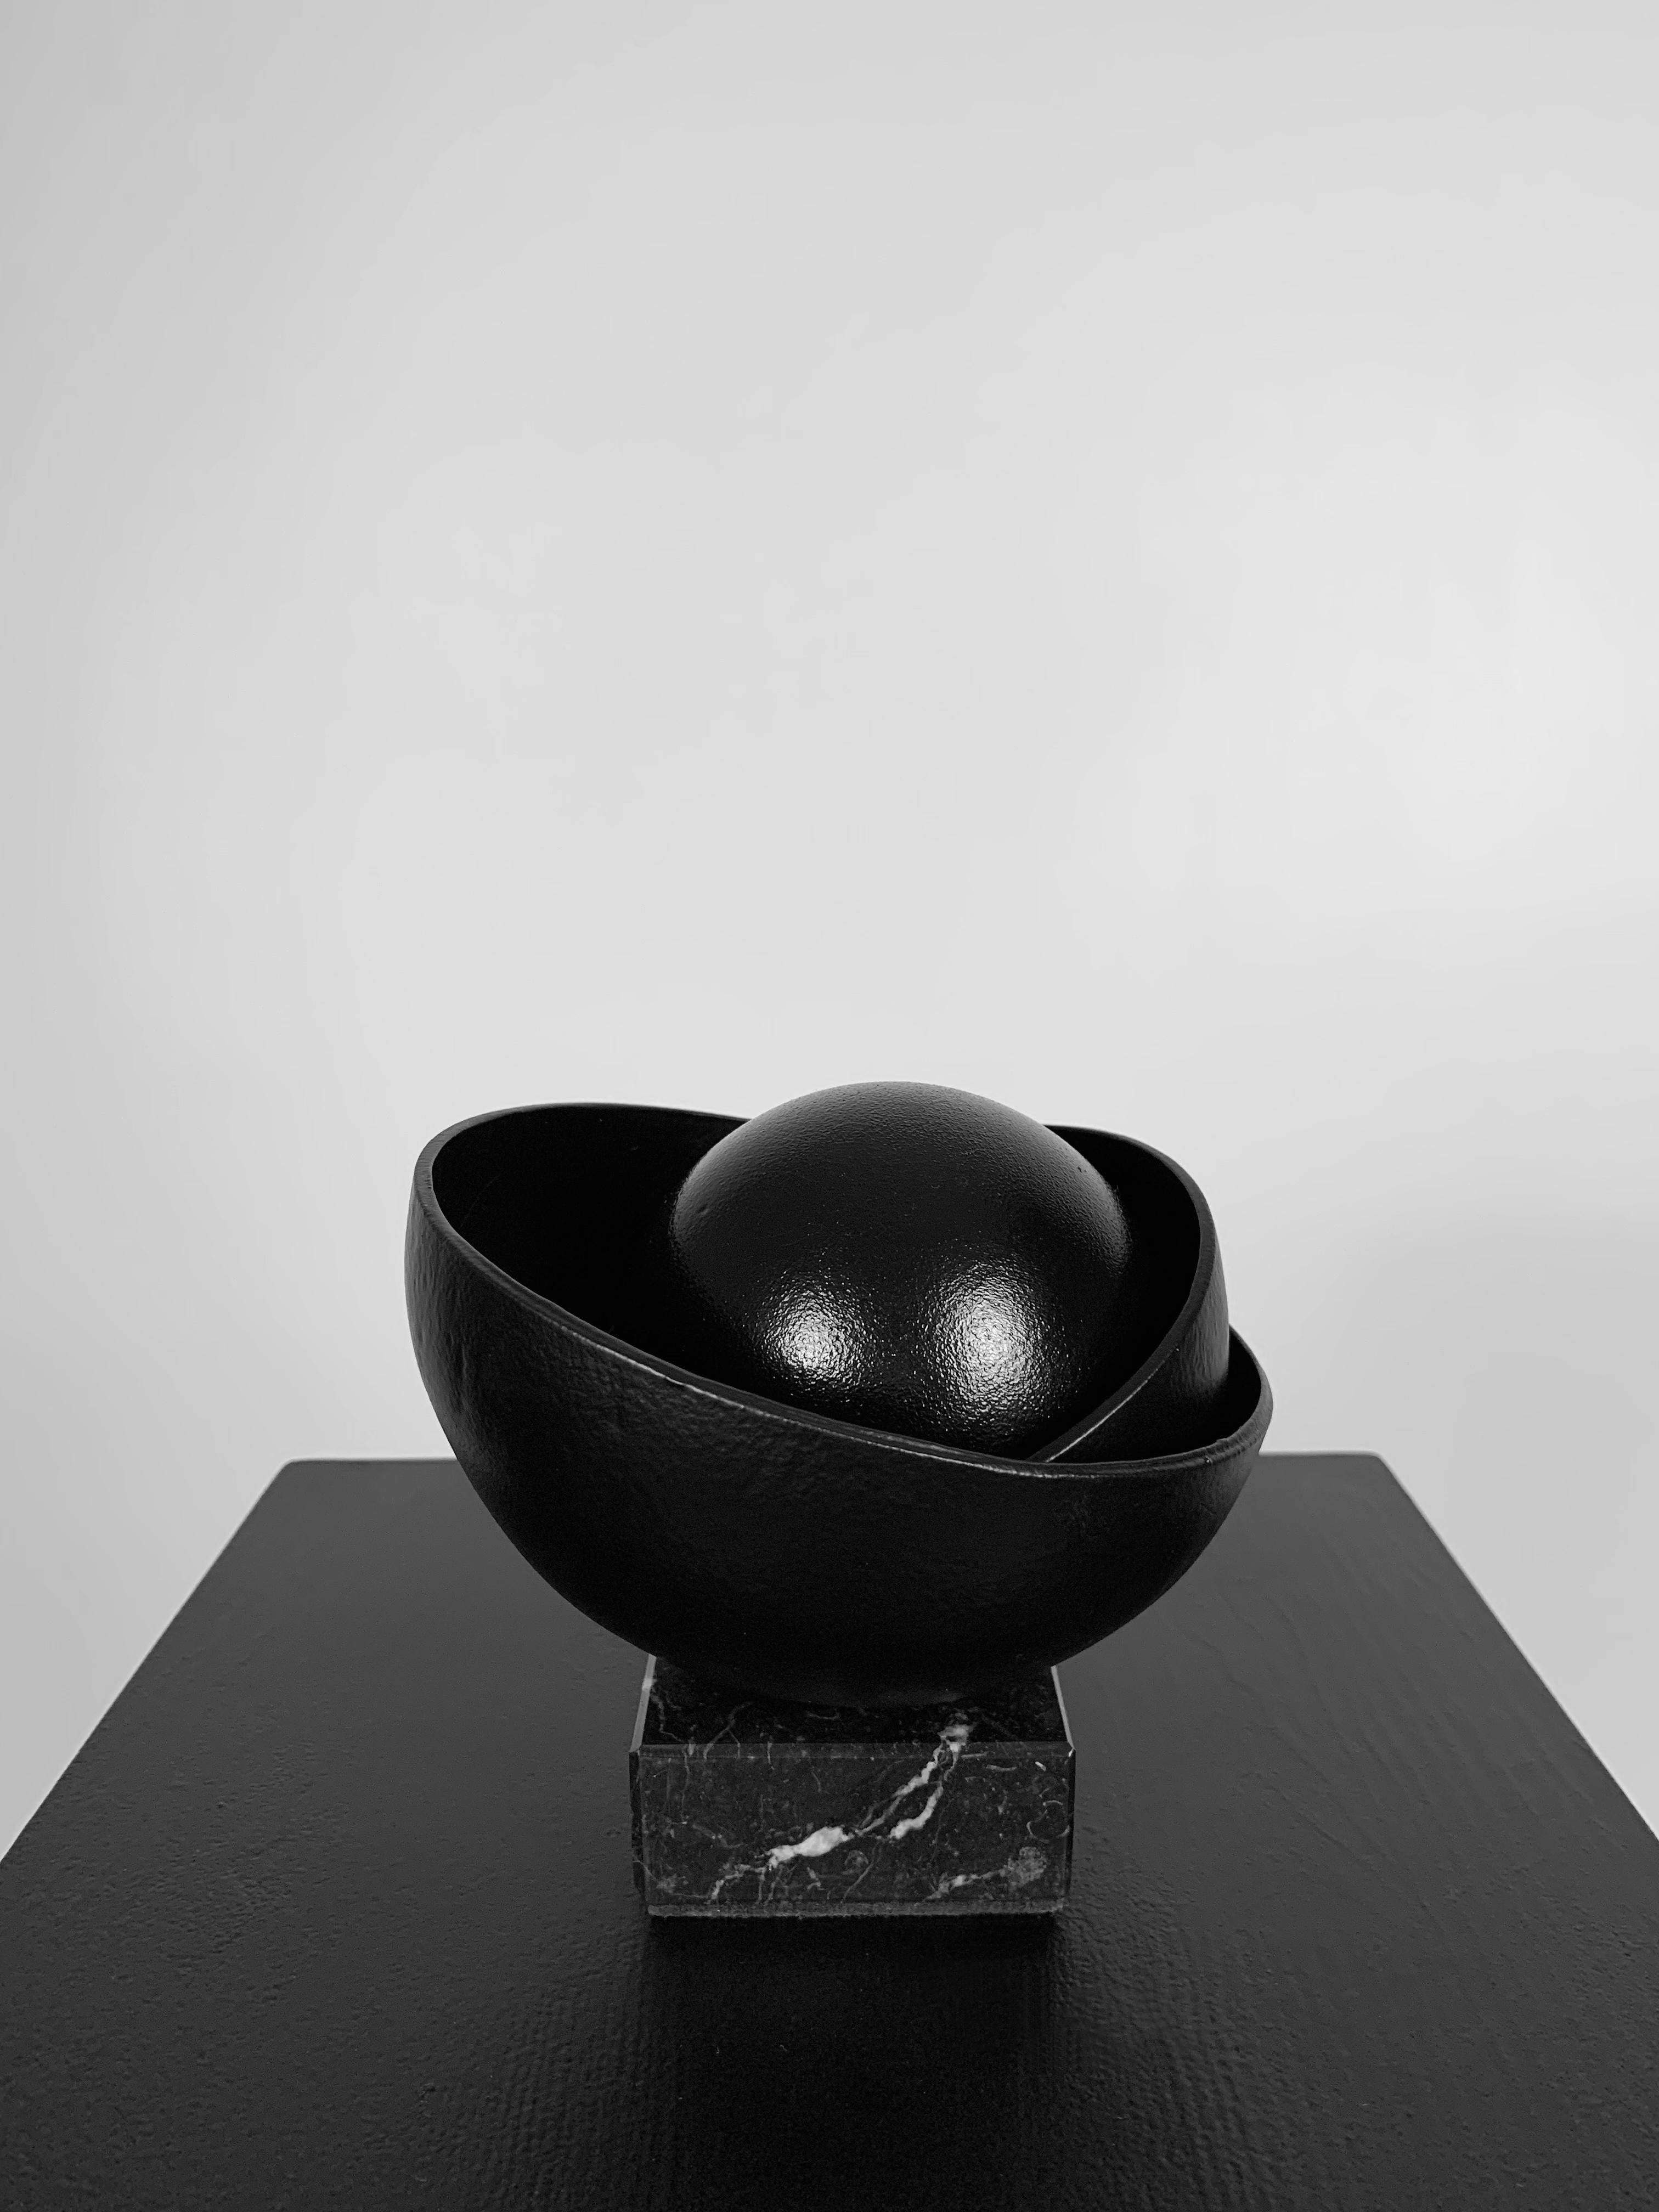 IRENA TONE Abstract Sculpture - Black Shell with Big Black Pearl